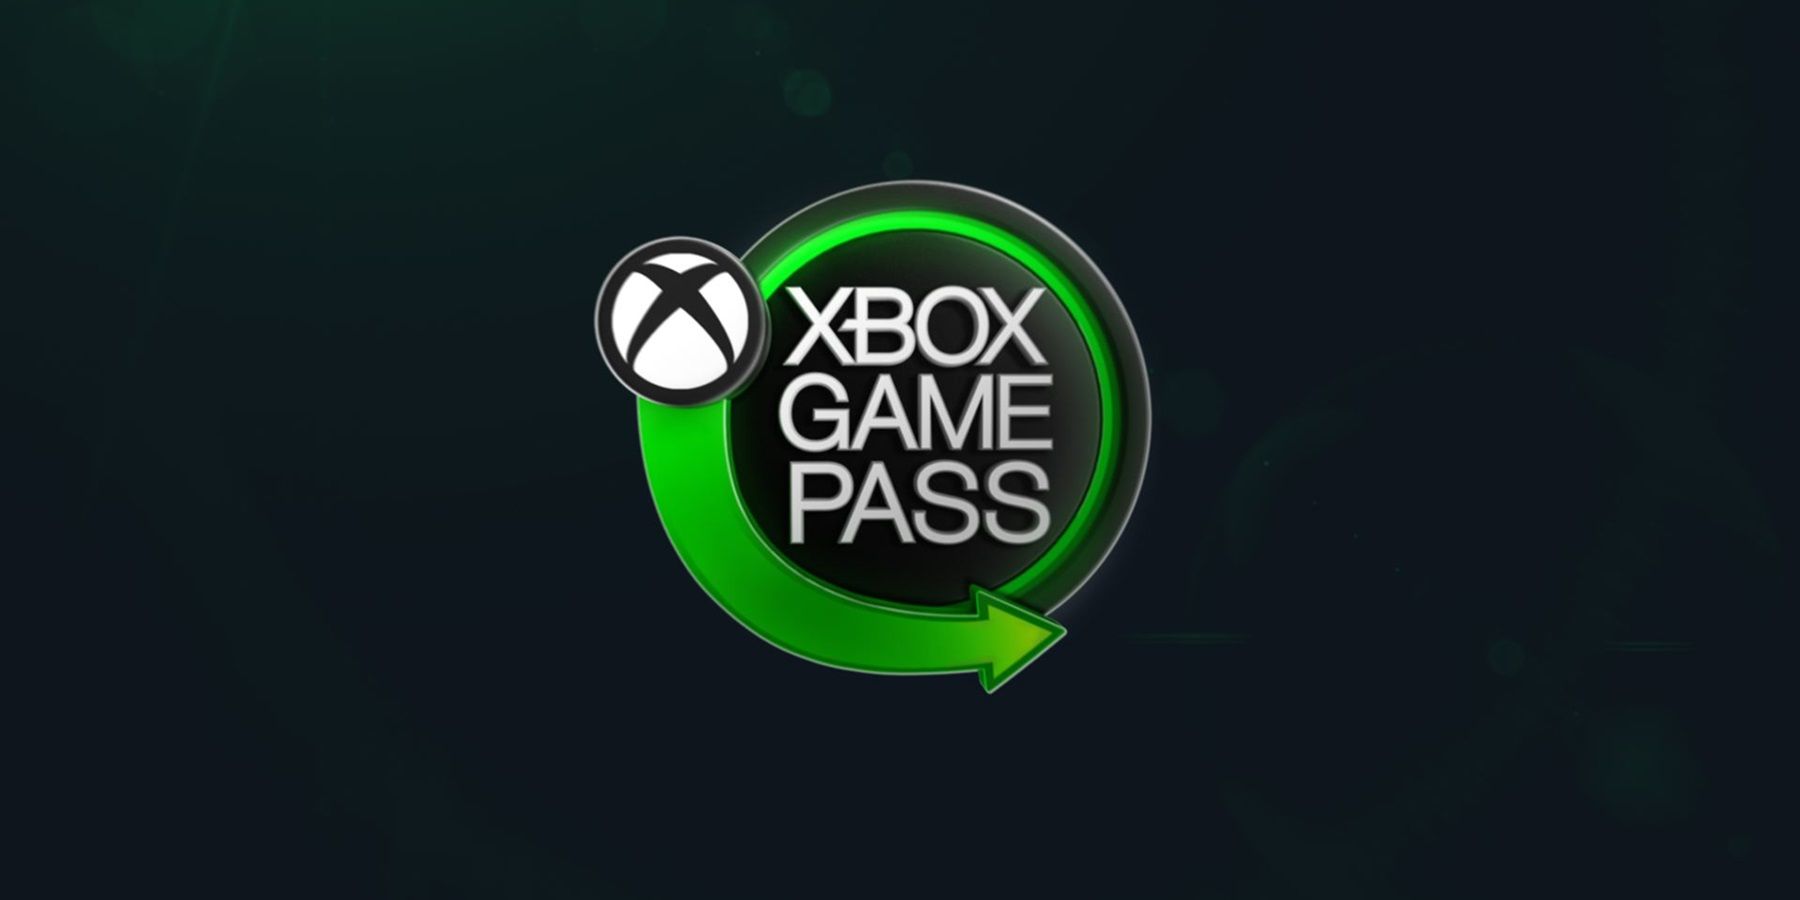 Microsoft Employees Are Having Their Free Game Pass Benefit